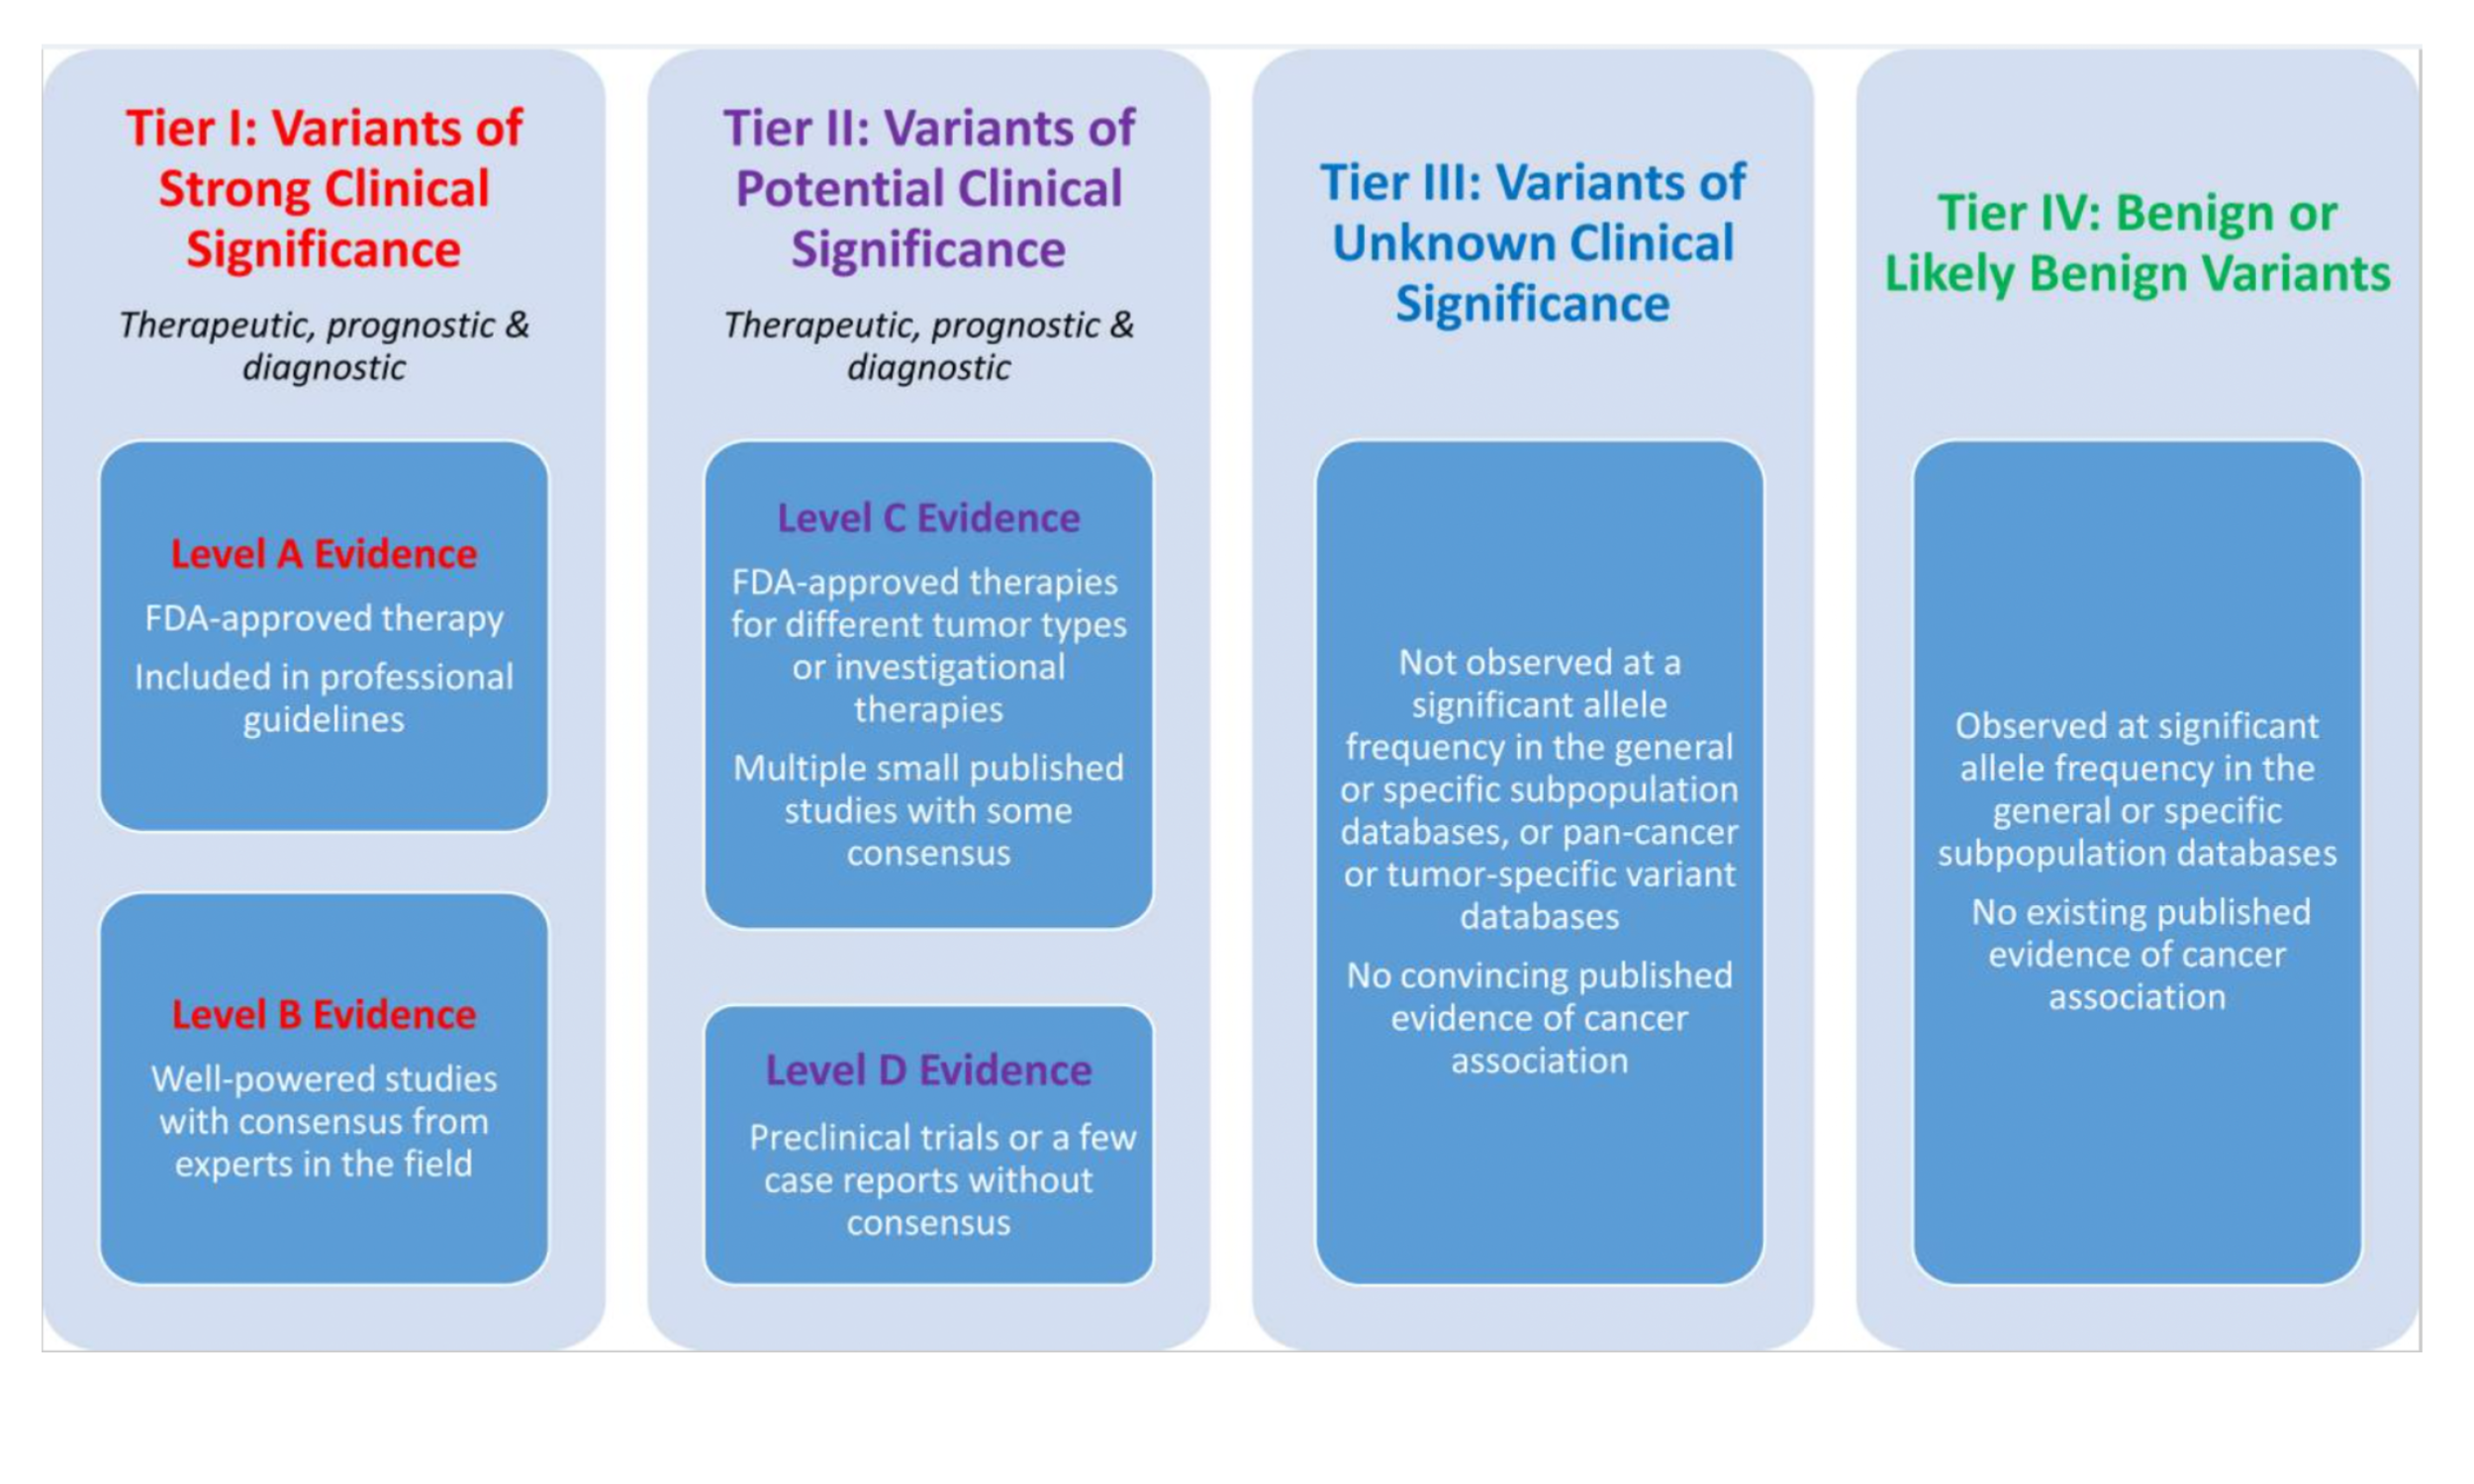 The AMP/ASCO/CAP Standards and Guidelines classify somatic variants into four Tiers and four Levels according to their clinical significance and level of evidence